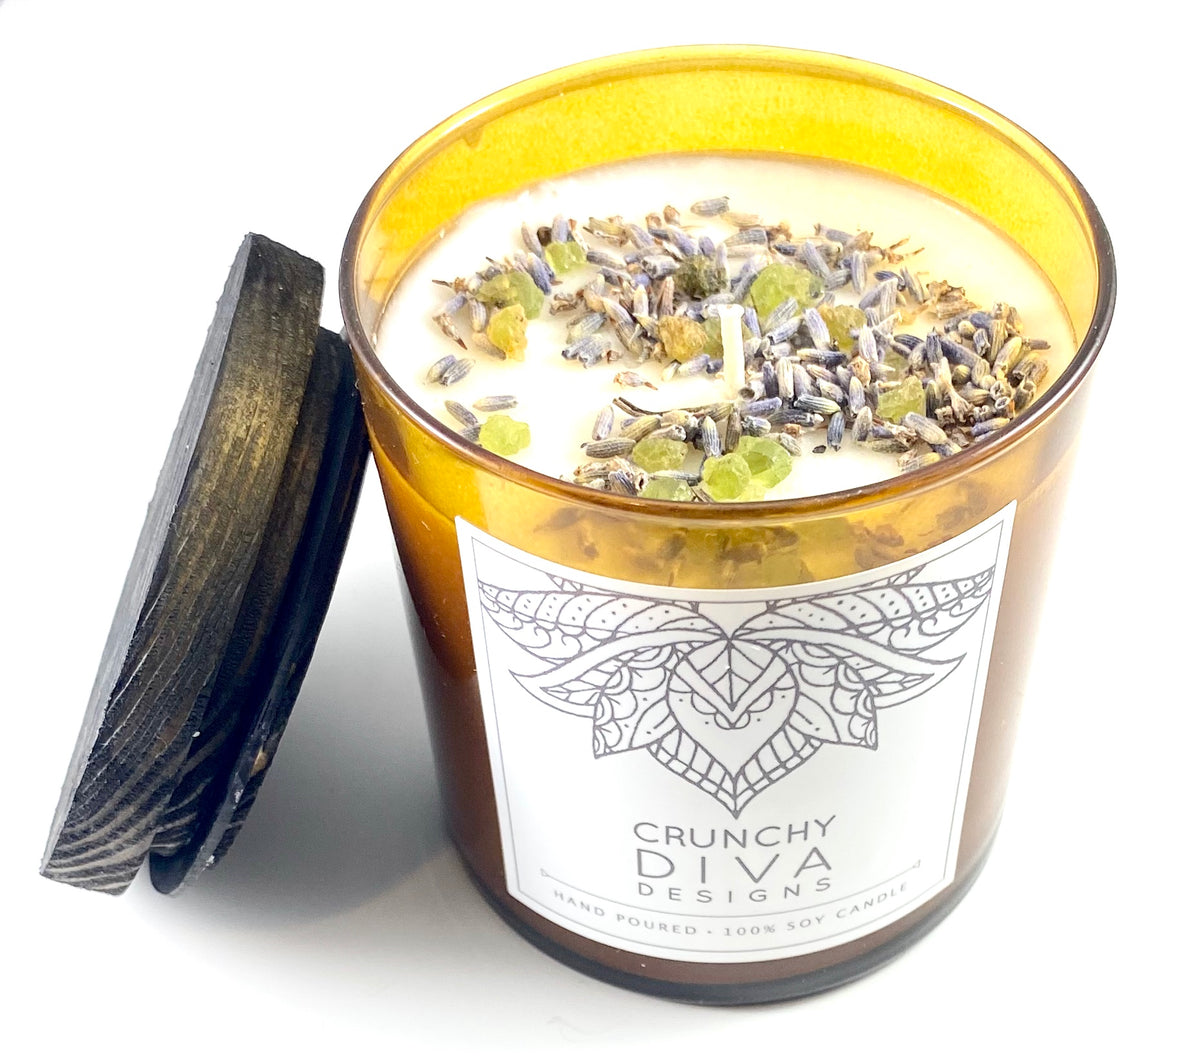 Crunchy Diva Designs Soy Candles - Large